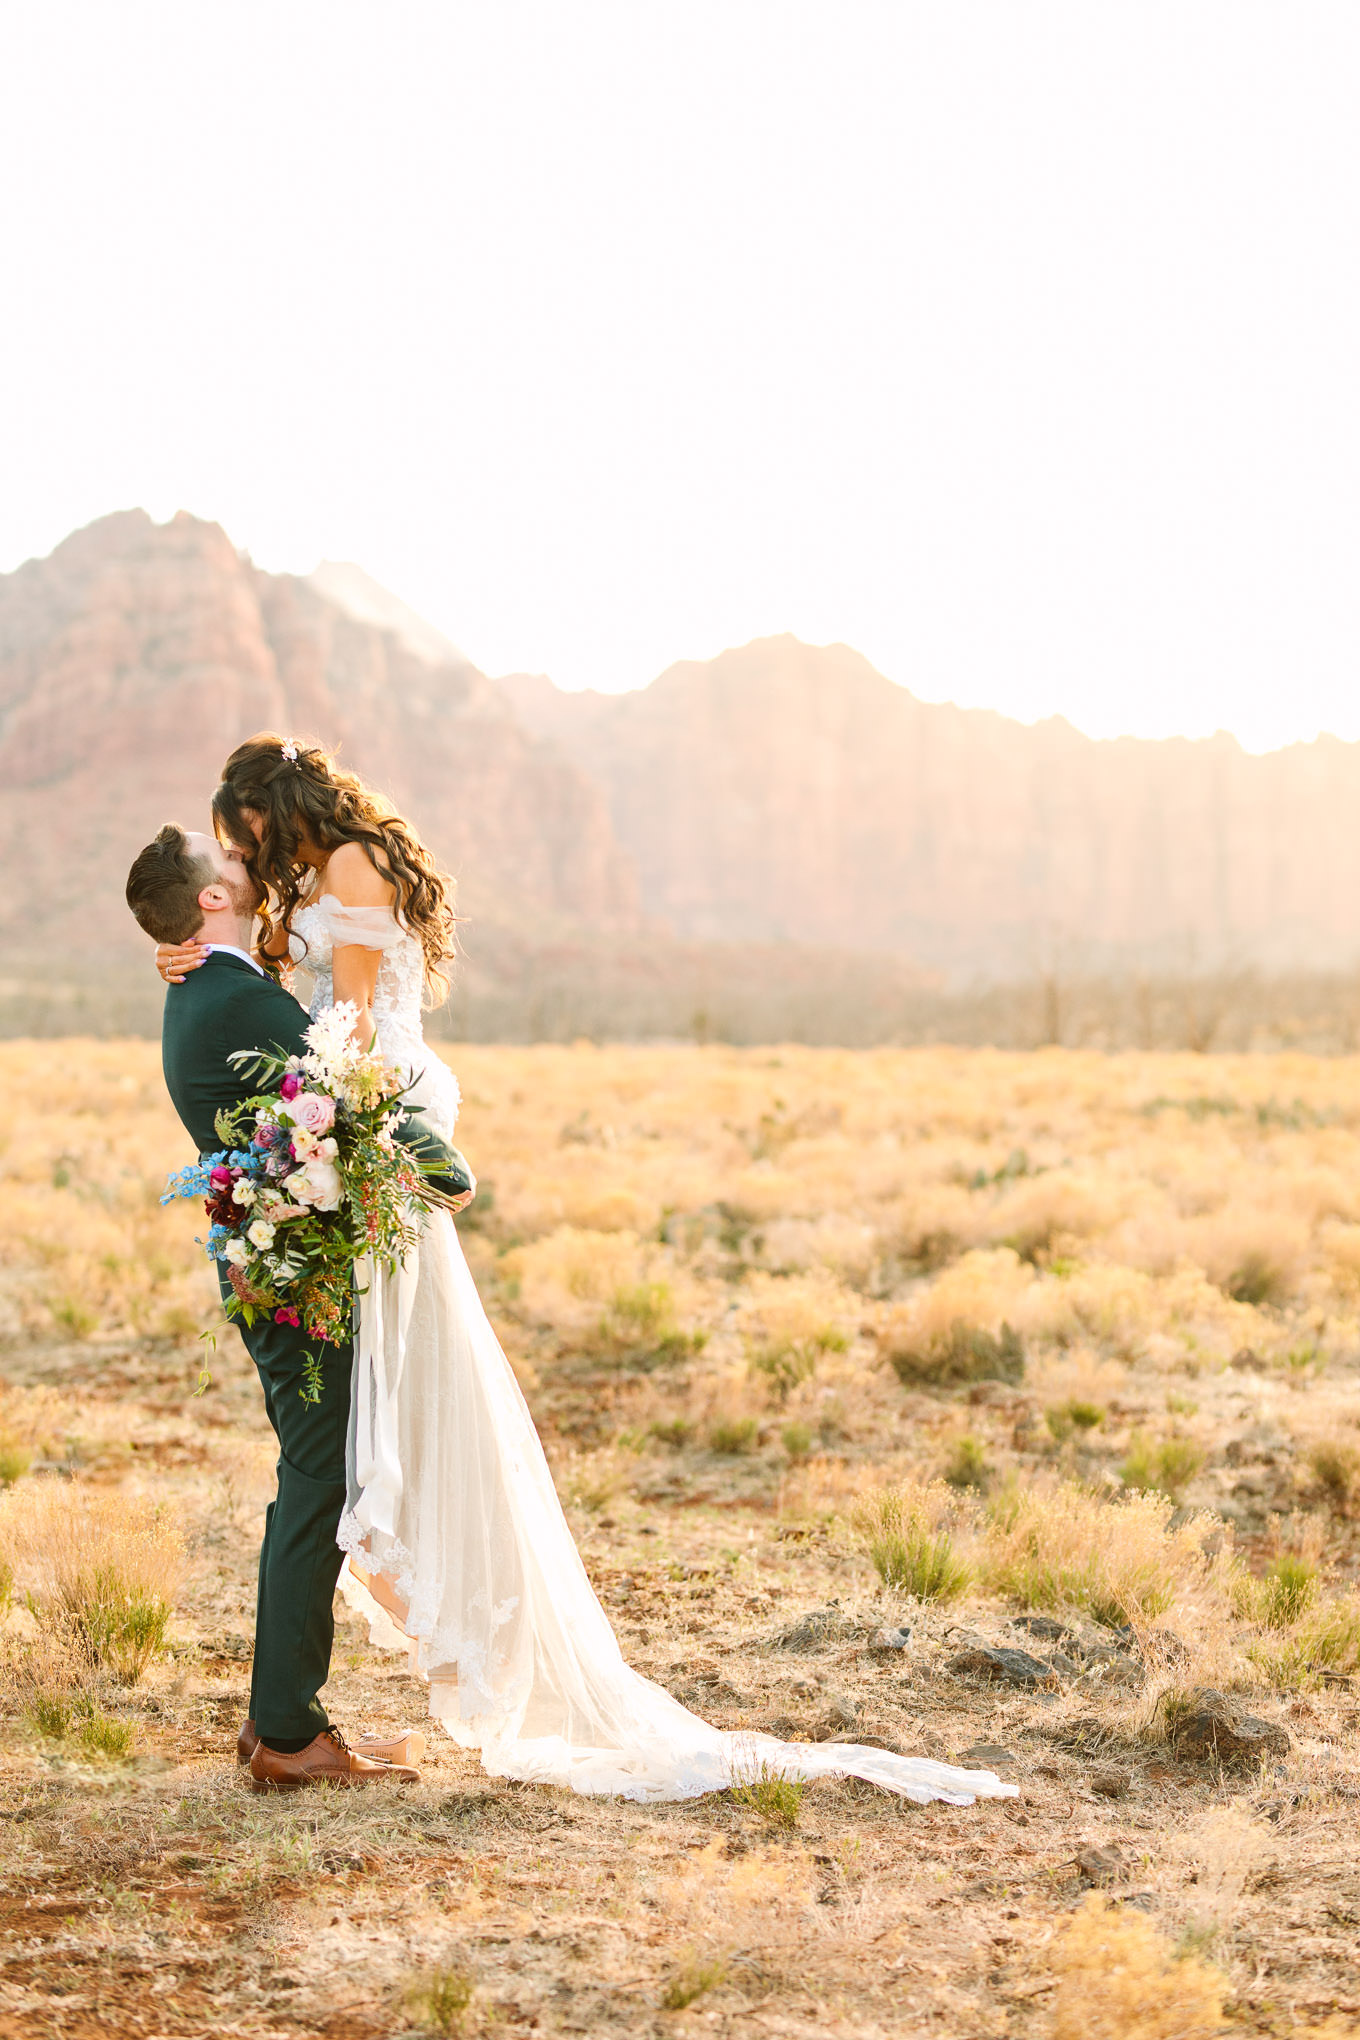 Bride with groom in green suit portraits | Zion Under Canvas camping elopement at sunrise | Colorful elopement photography | #utahelopement #zionelopement #zionwedding #undercanvaszion #sunriseelopement #adventureelopement  Source: Mary Costa Photography | Los Angeles